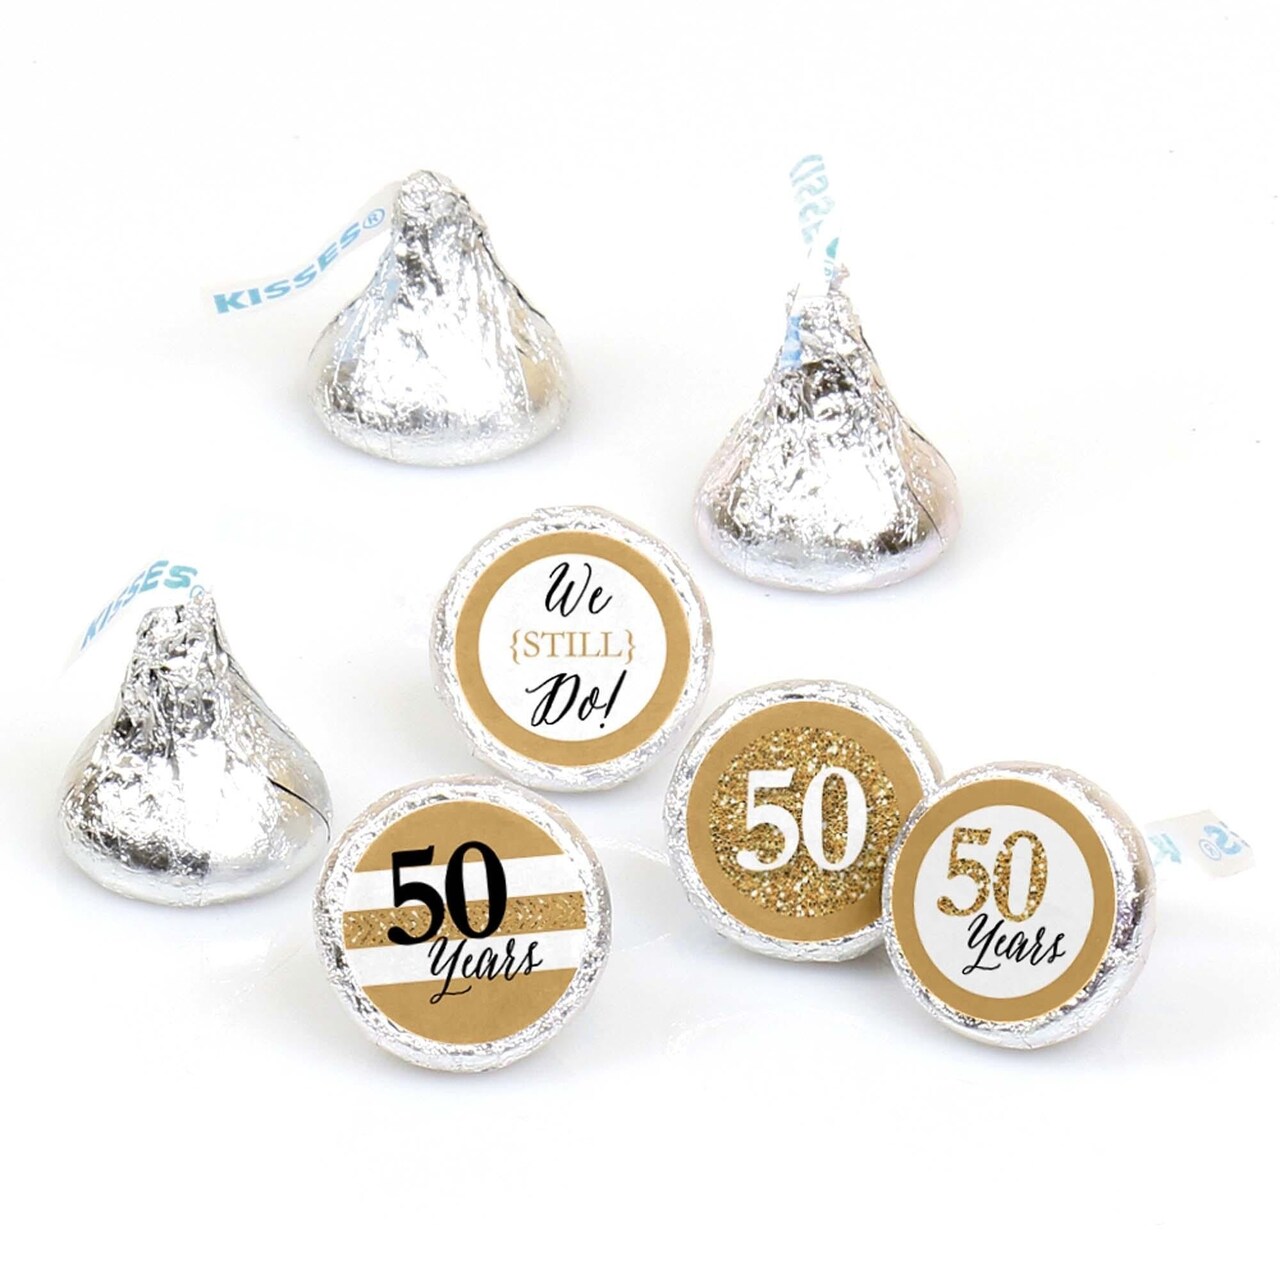 Big Dot of Happiness We Still Do - 50th Wedding Anniversary - Party Round Candy Sticker Favors - Labels Fits Chocolate Candy (1 sheet of 108)